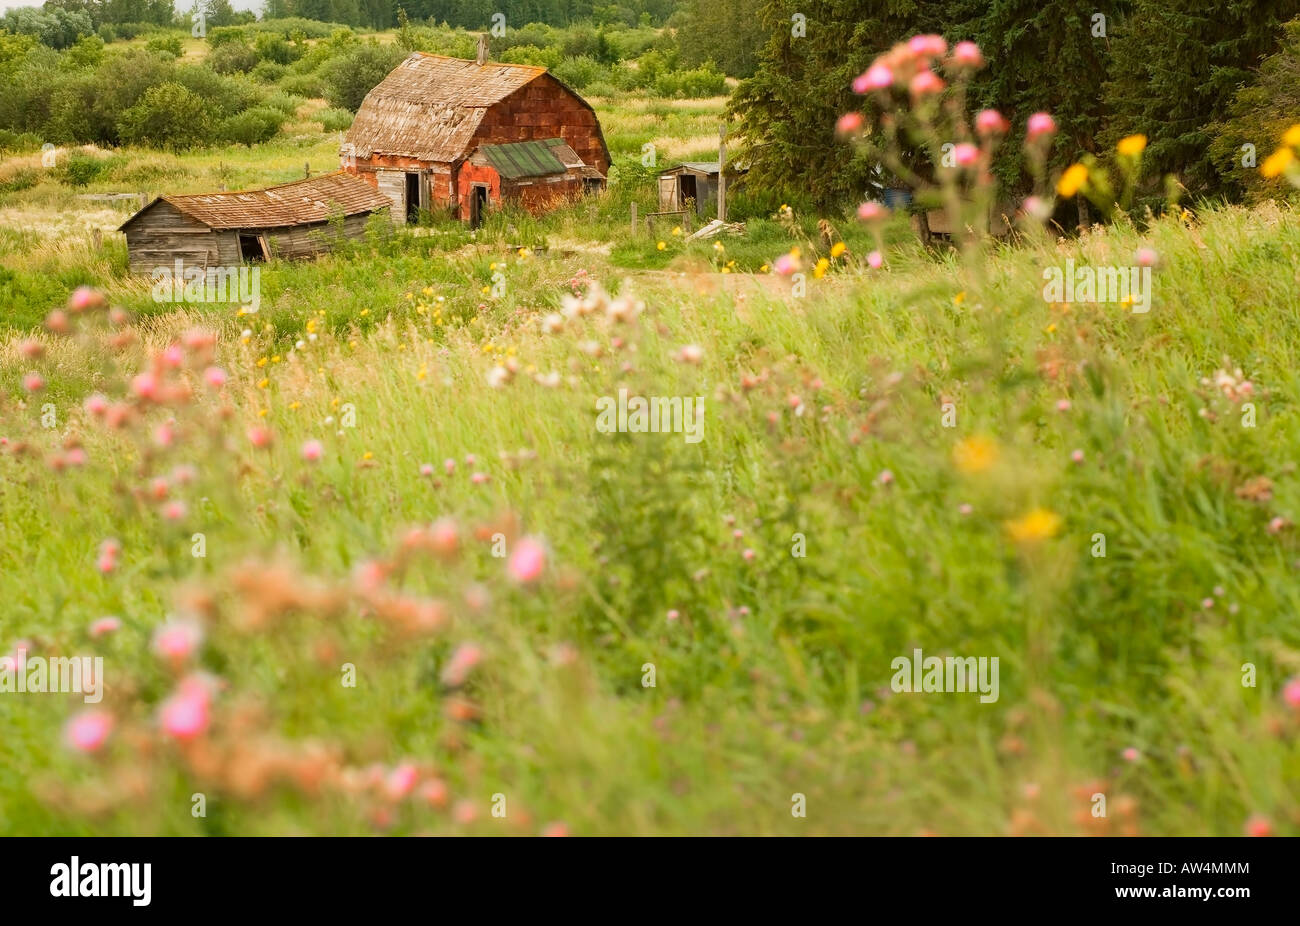 Old farm structures in a field, Alberta, Canada Stock Photo